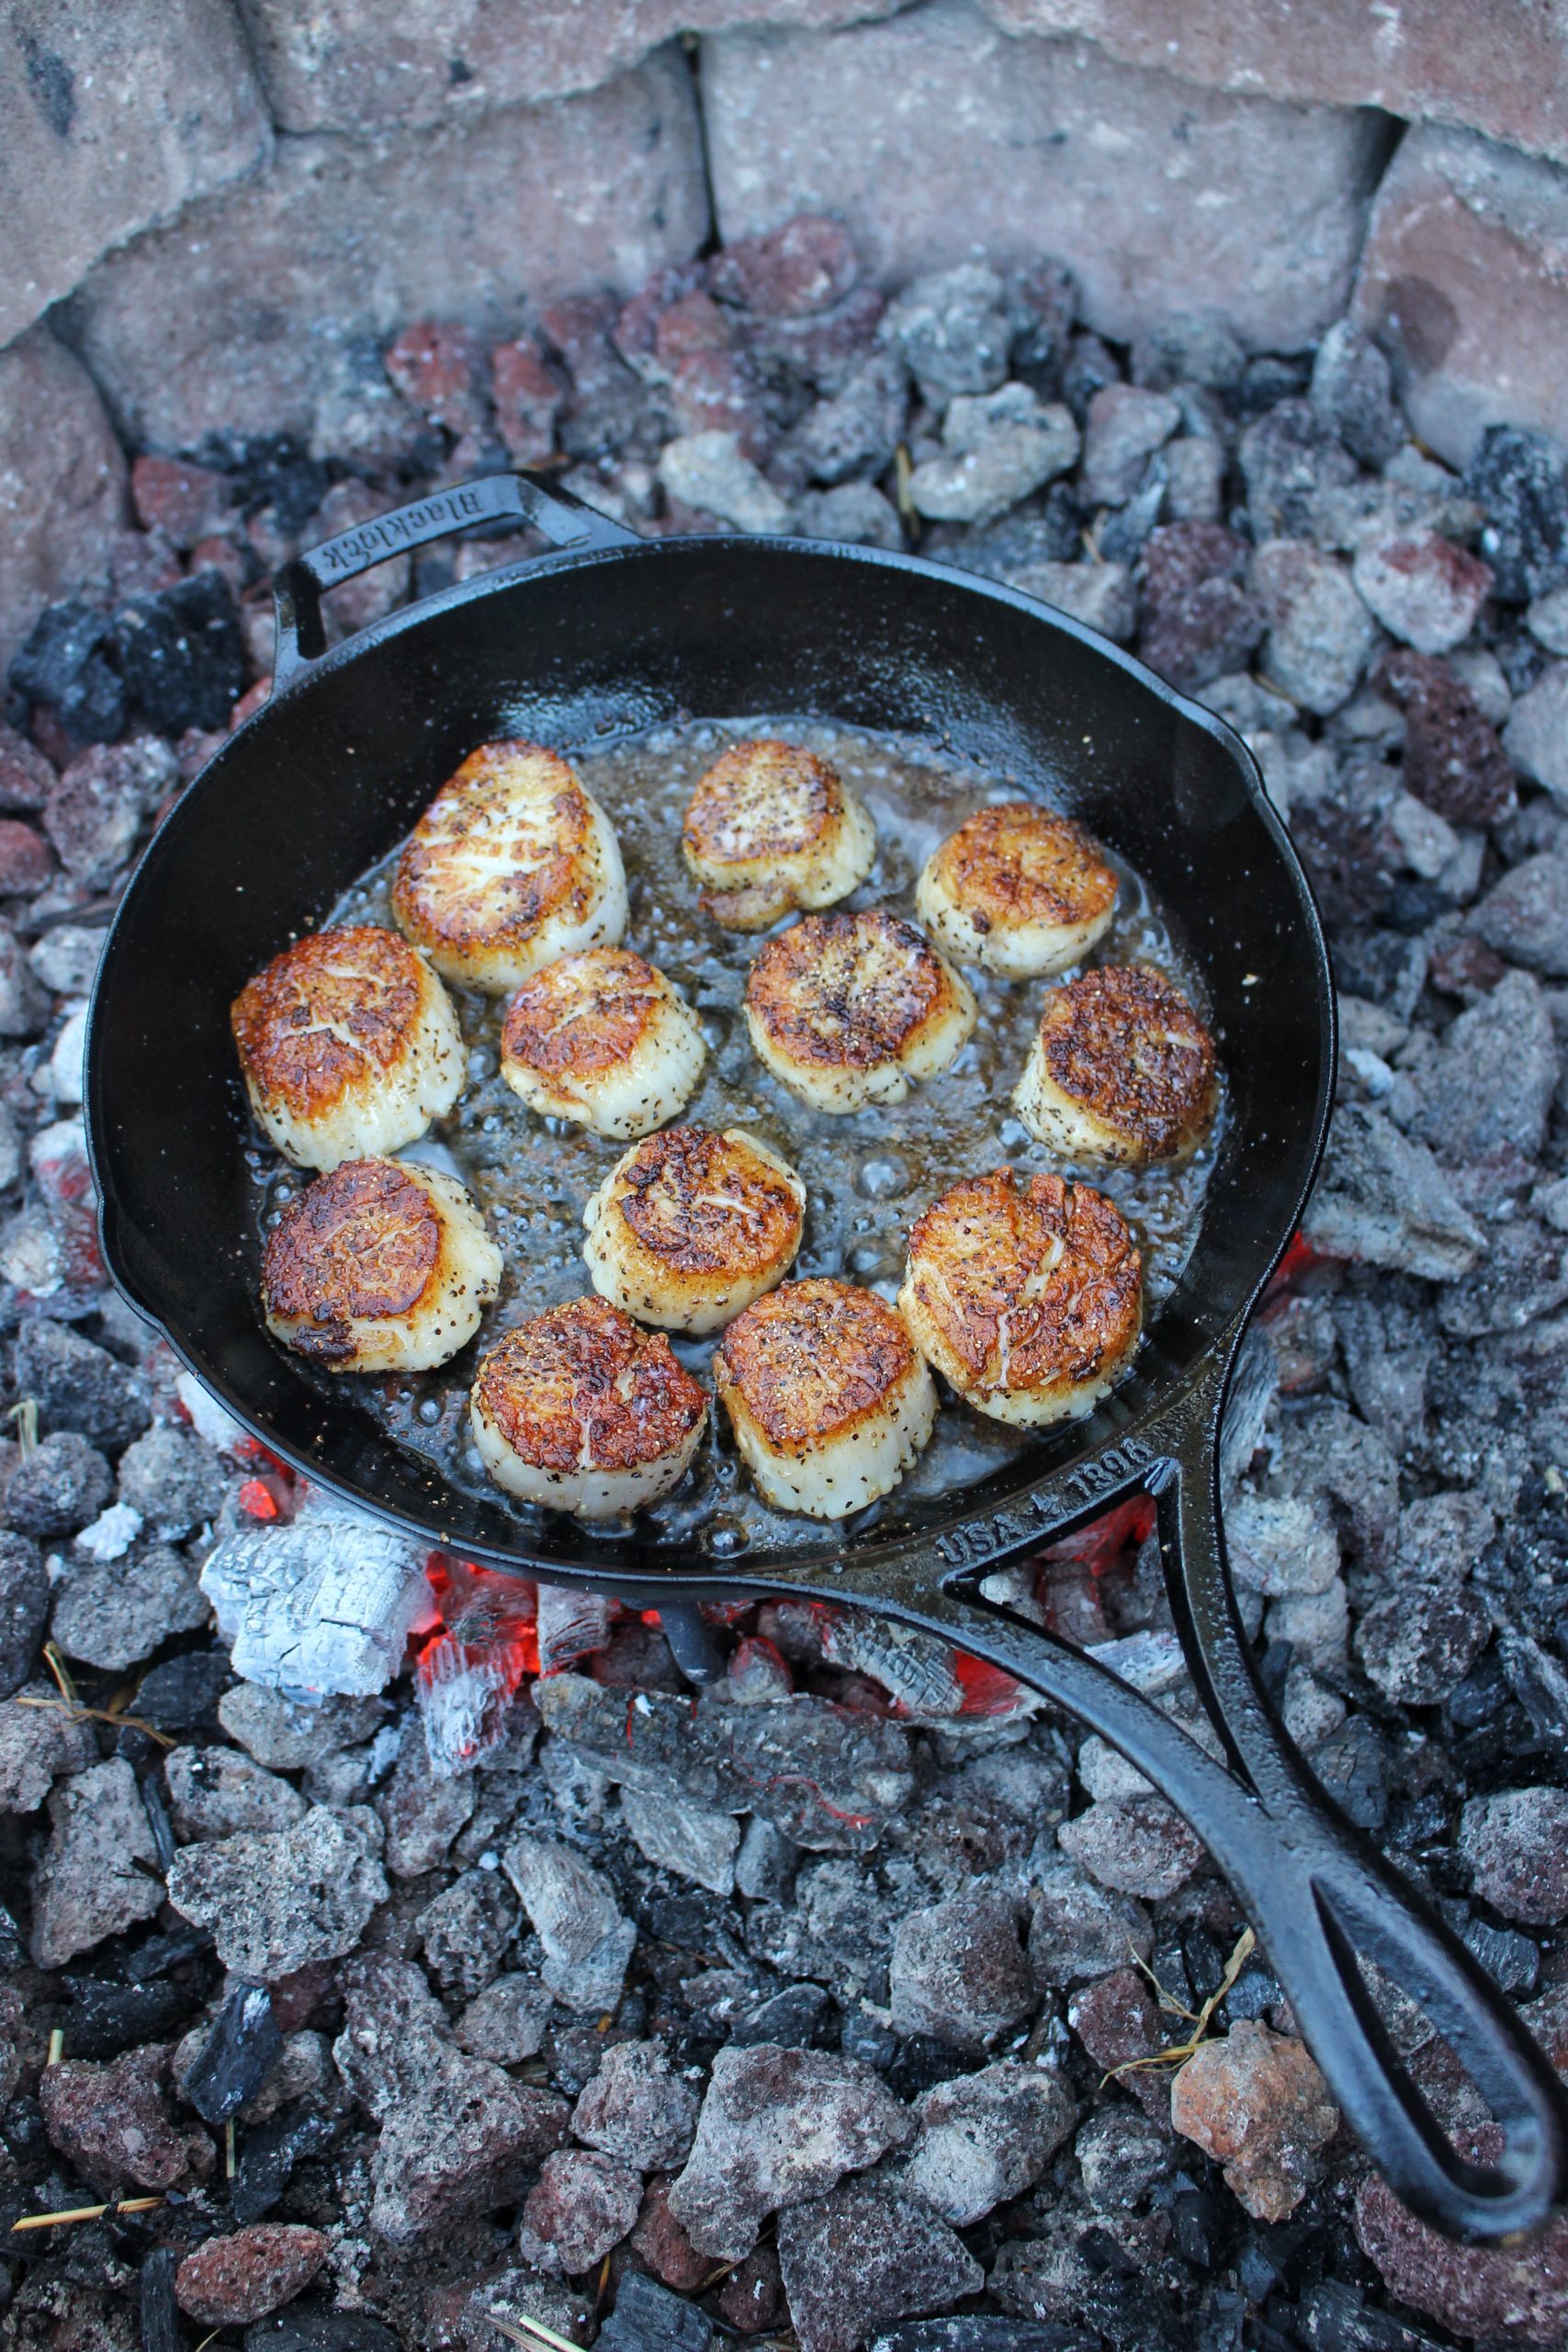 Brown Sugar and Guinness Scallops